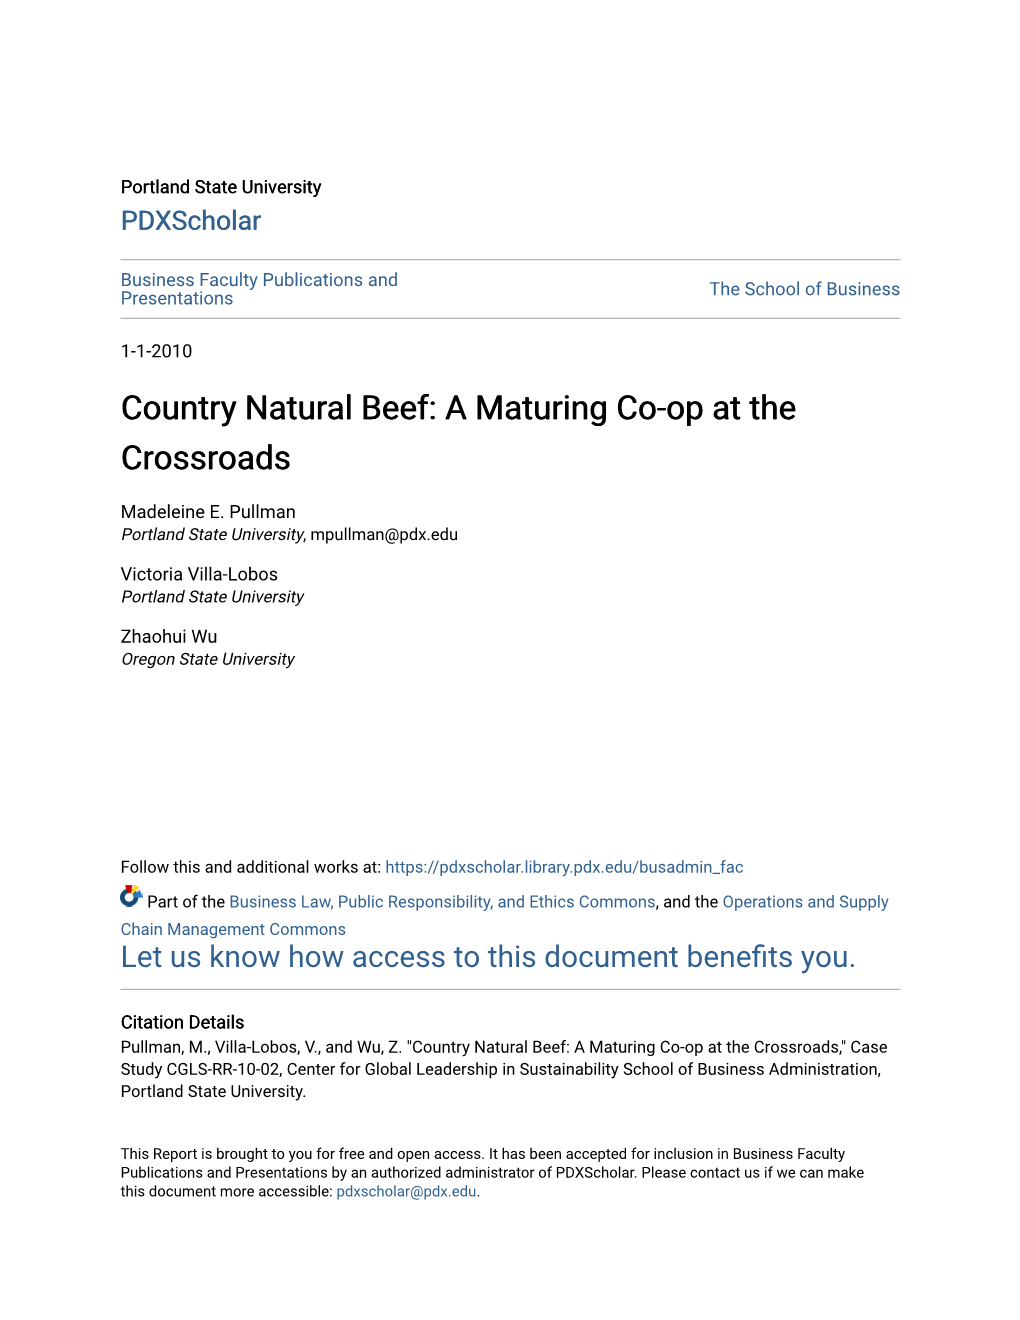 Country Natural Beef: a Maturing Co-Op at the Crossroads